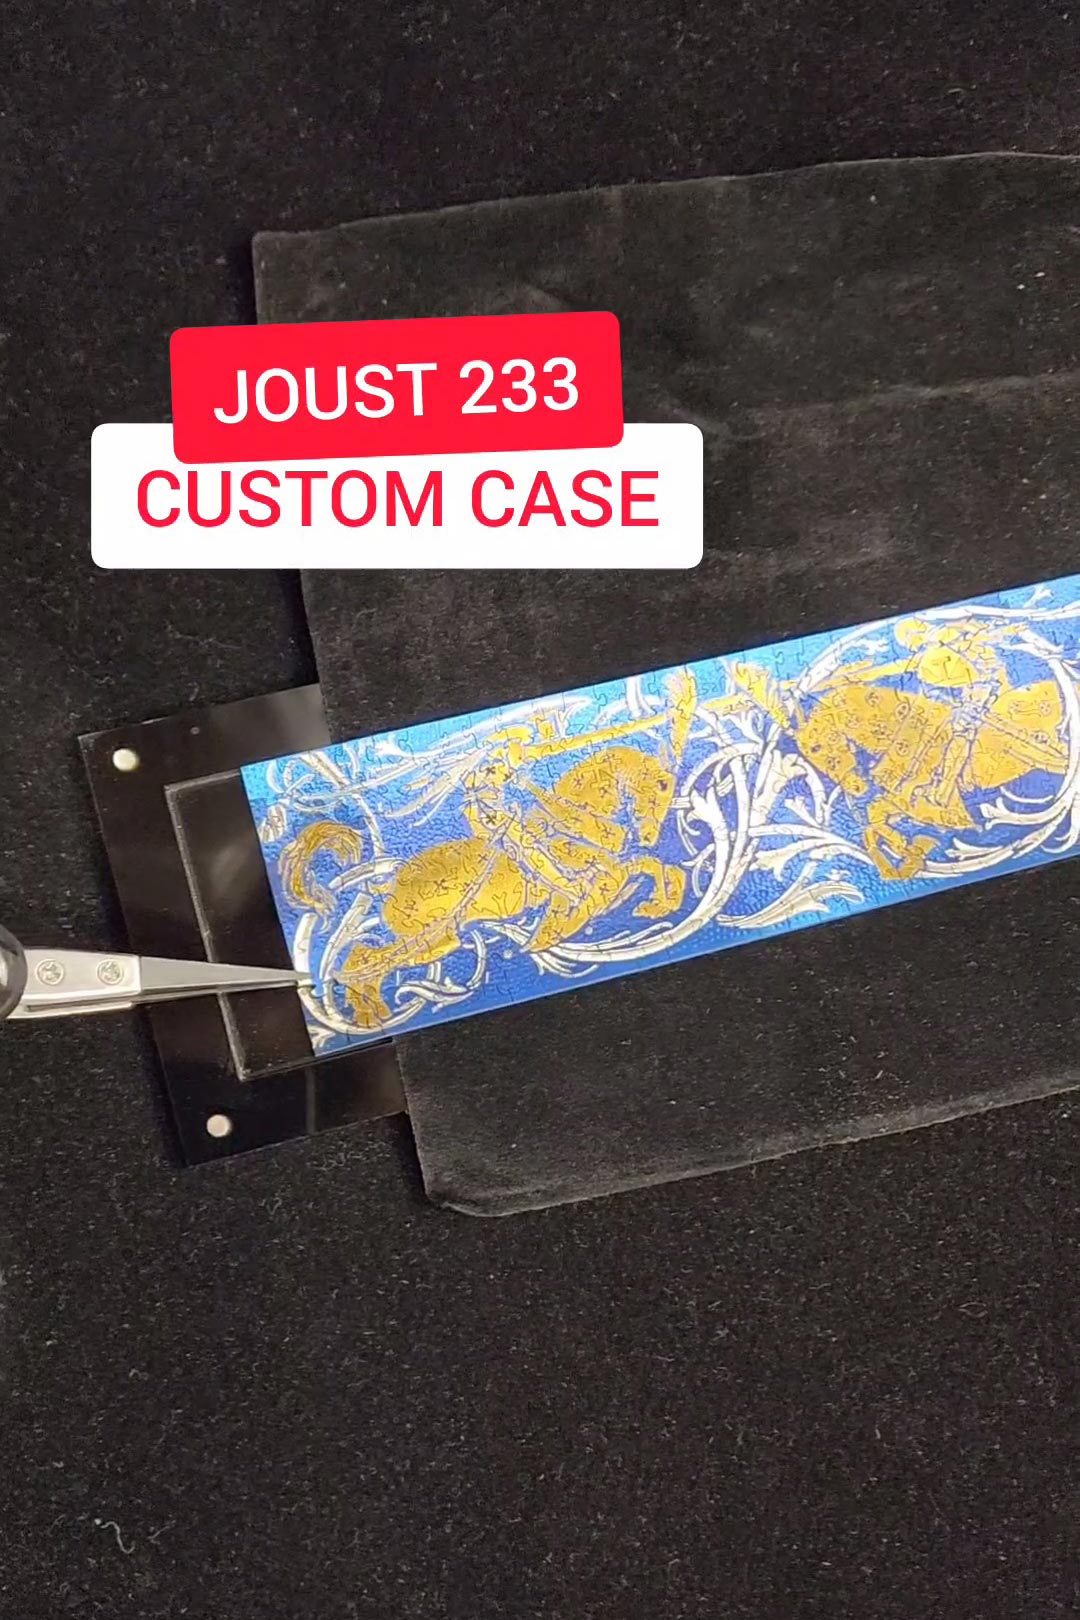 We got a custom case for Joust 233 Jigsaw Puzzle